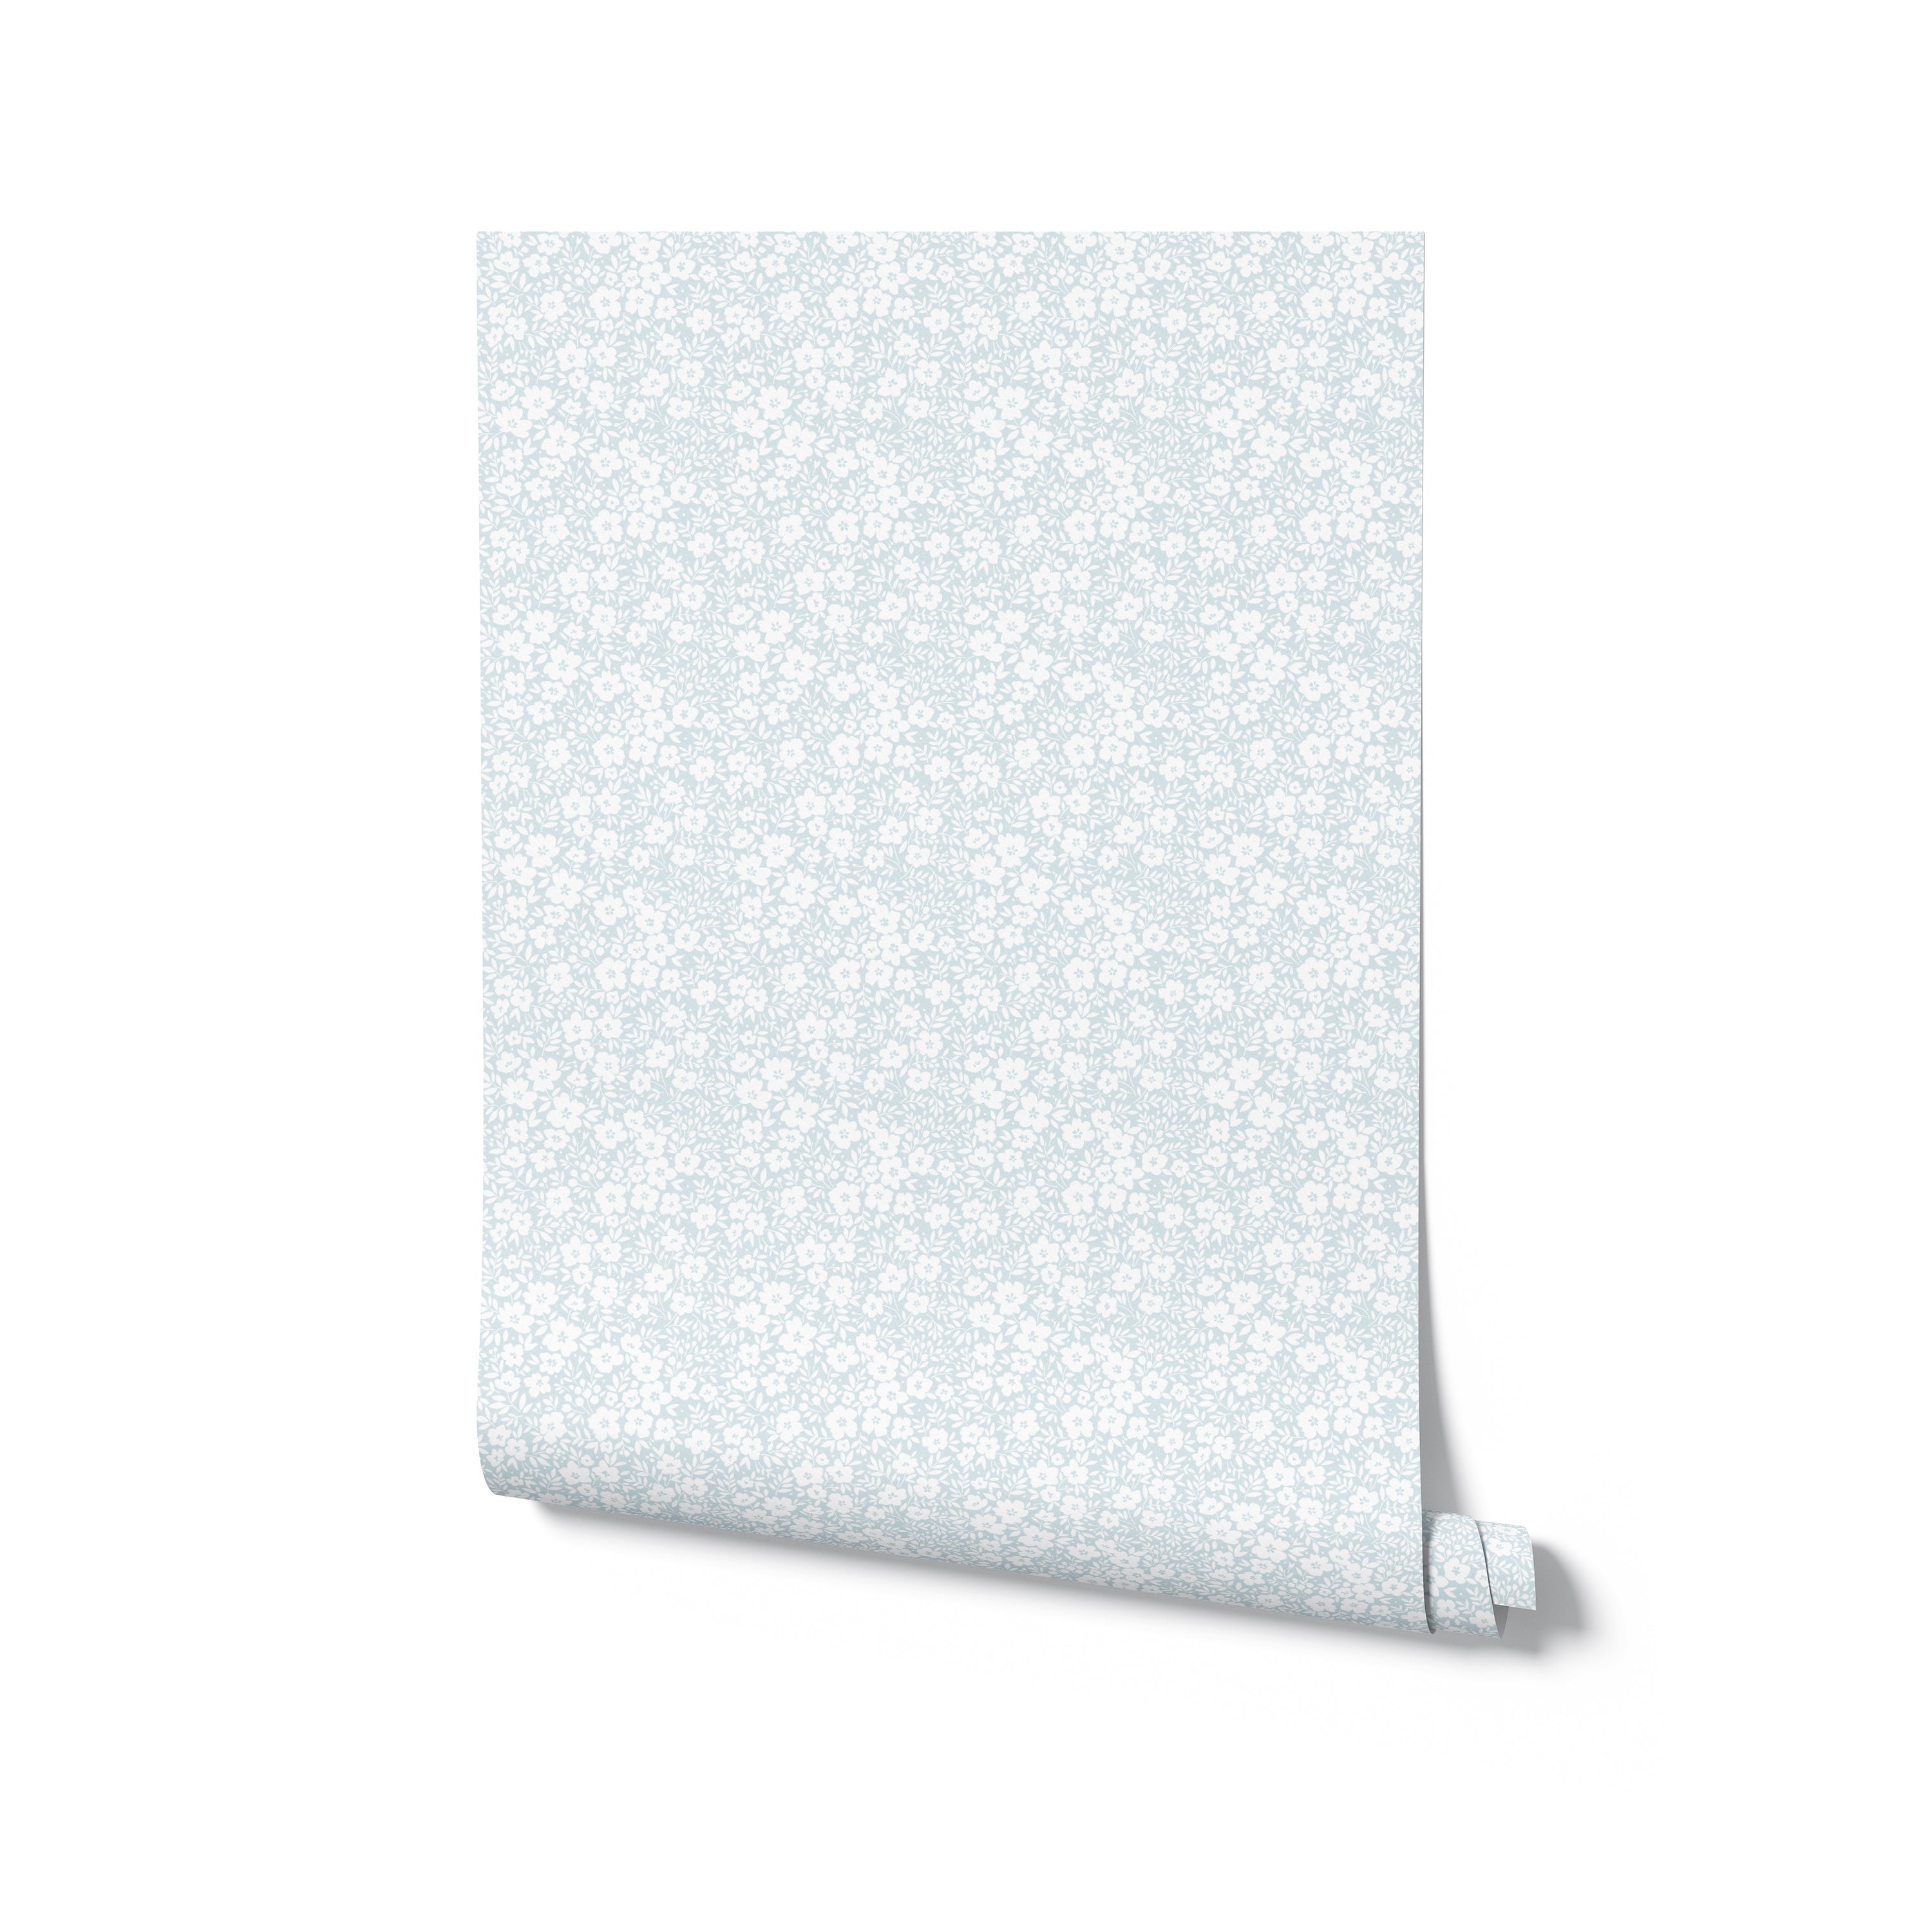 A wallpaper roll of 'Flower Power' design, showcasing a pale ice blue backdrop with a fine white flower print, standing vertically with the edge unrolling.